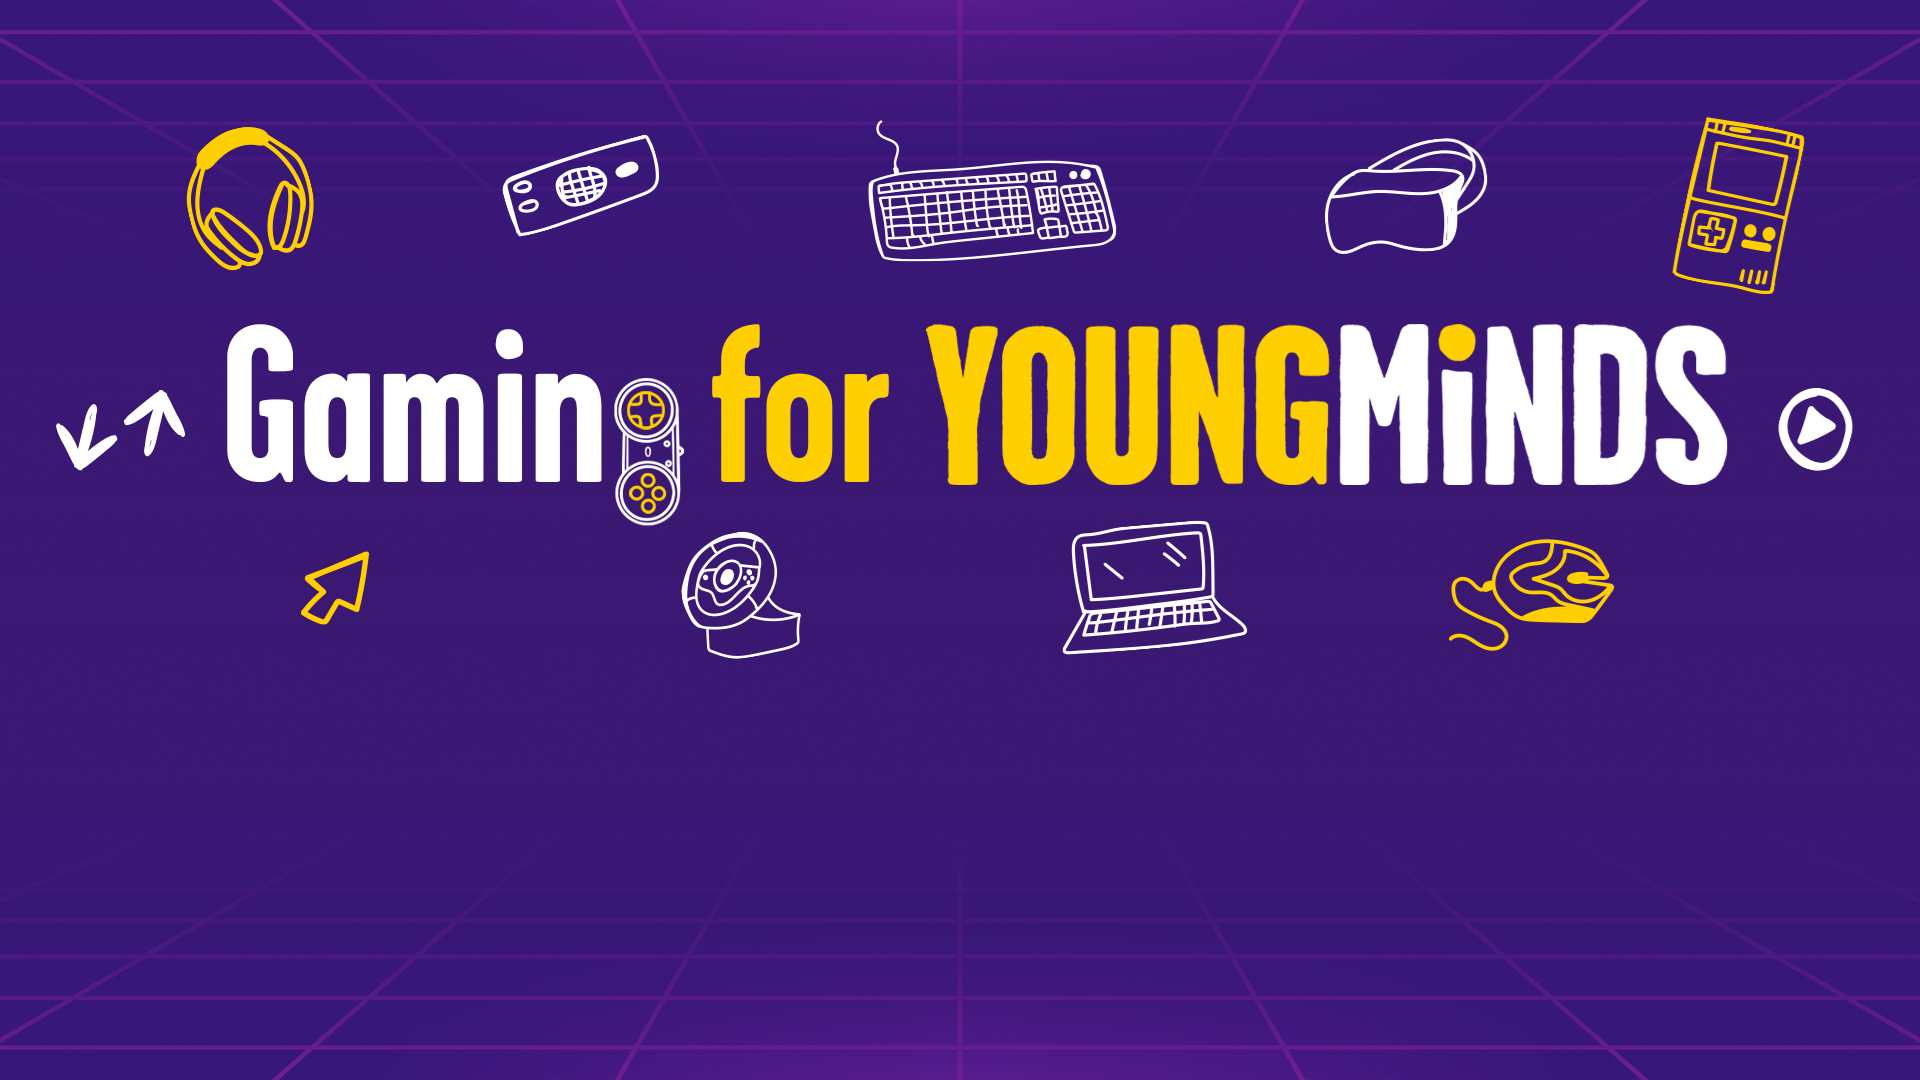 Text reads: 'Gaming for YoungMinds'.